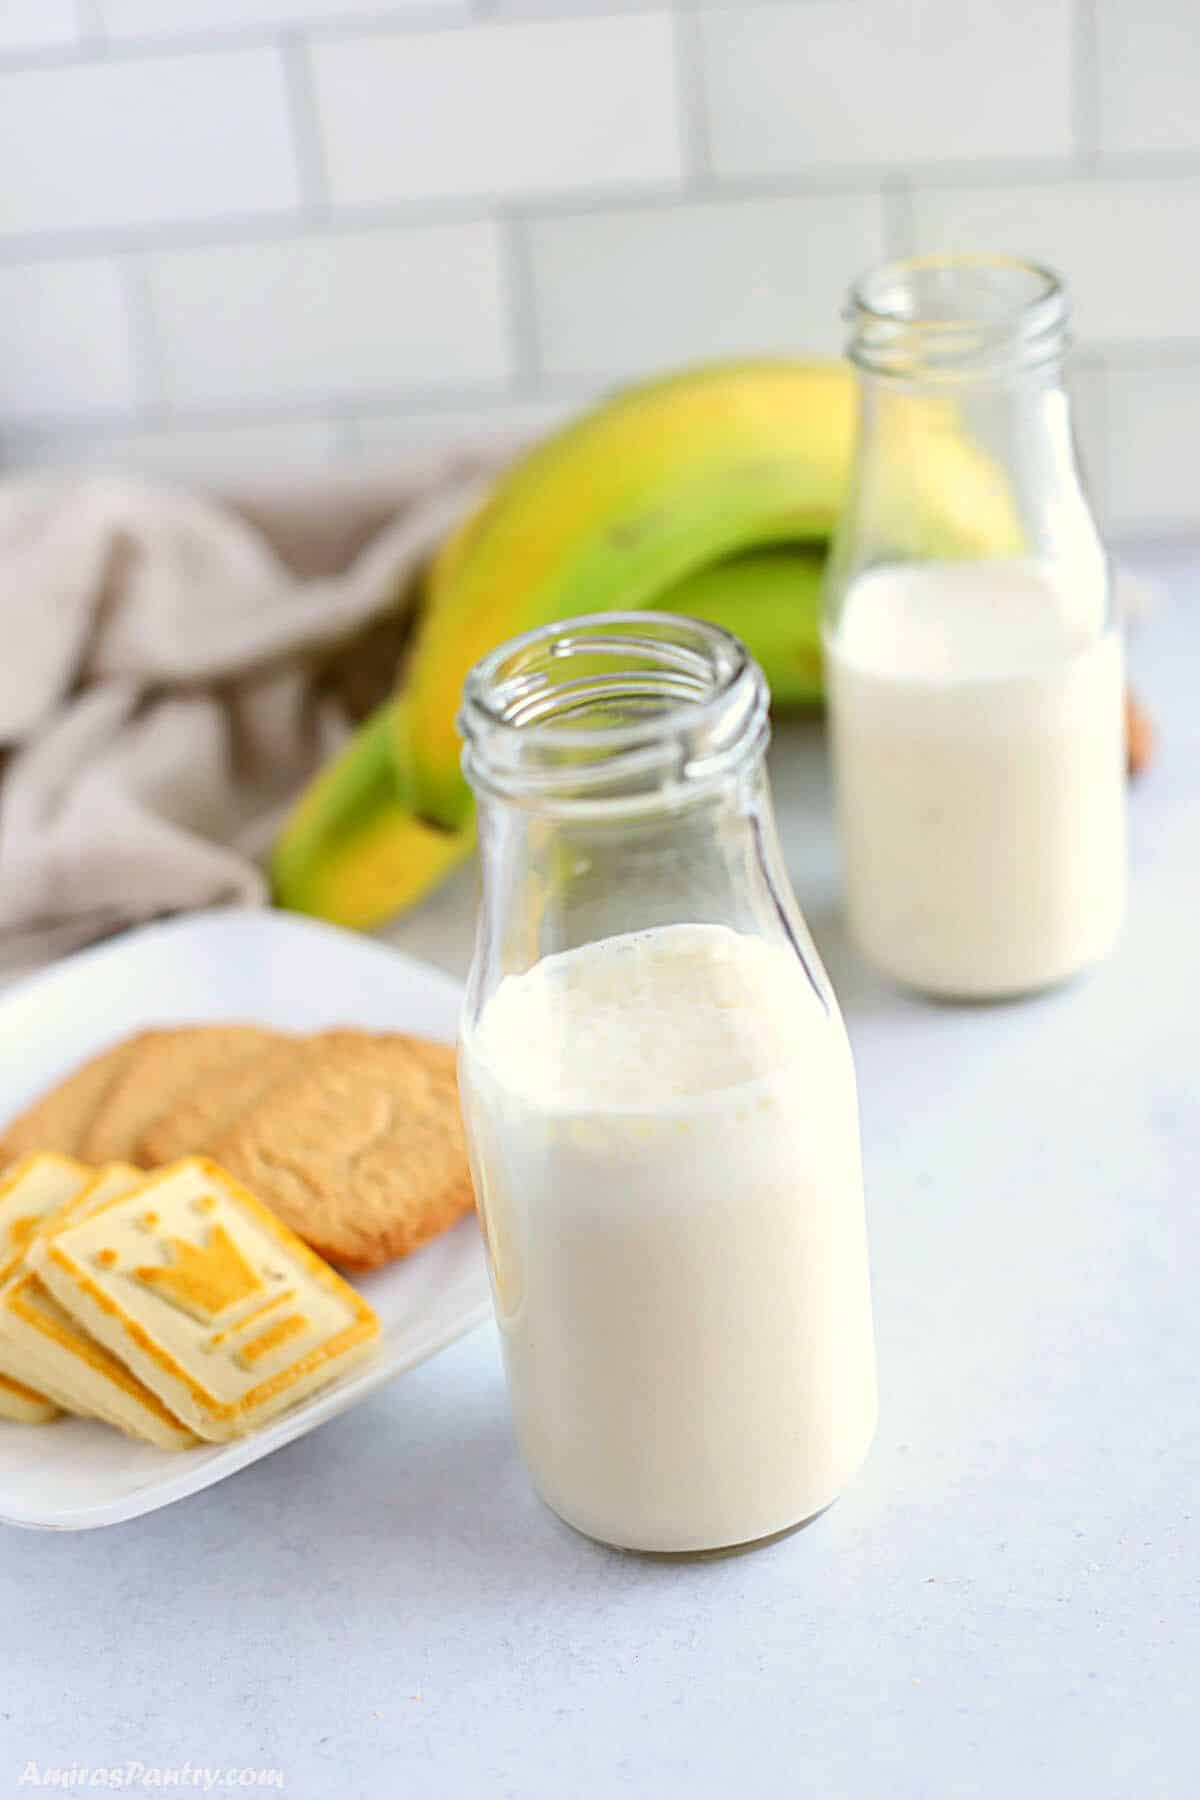 bottles of banana milk with cookies on the side and bananas on the background.